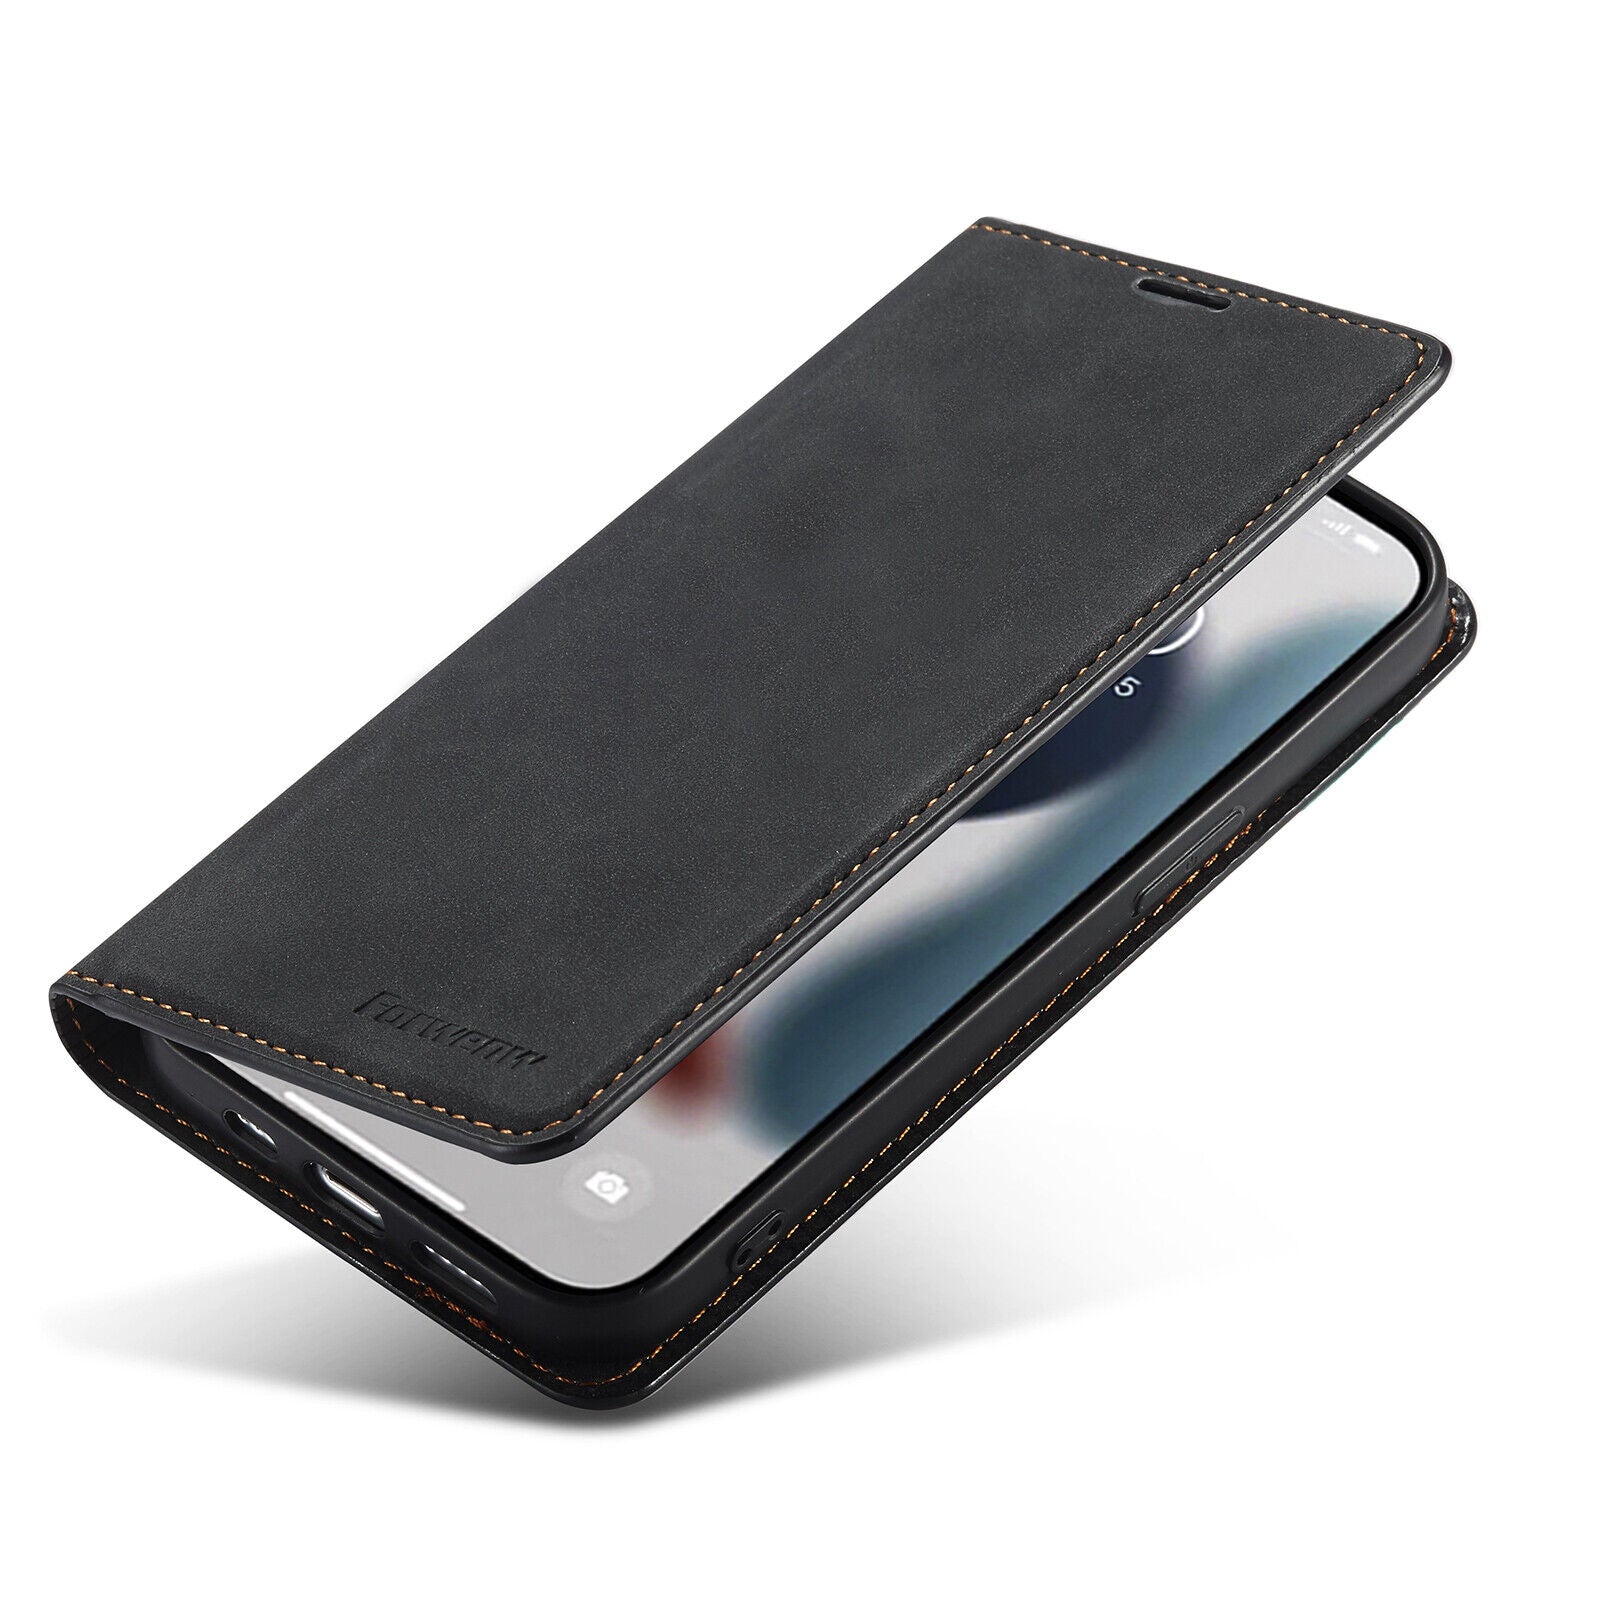 Everlab Wallet Leather Flip Case Cover Stand For iPhone